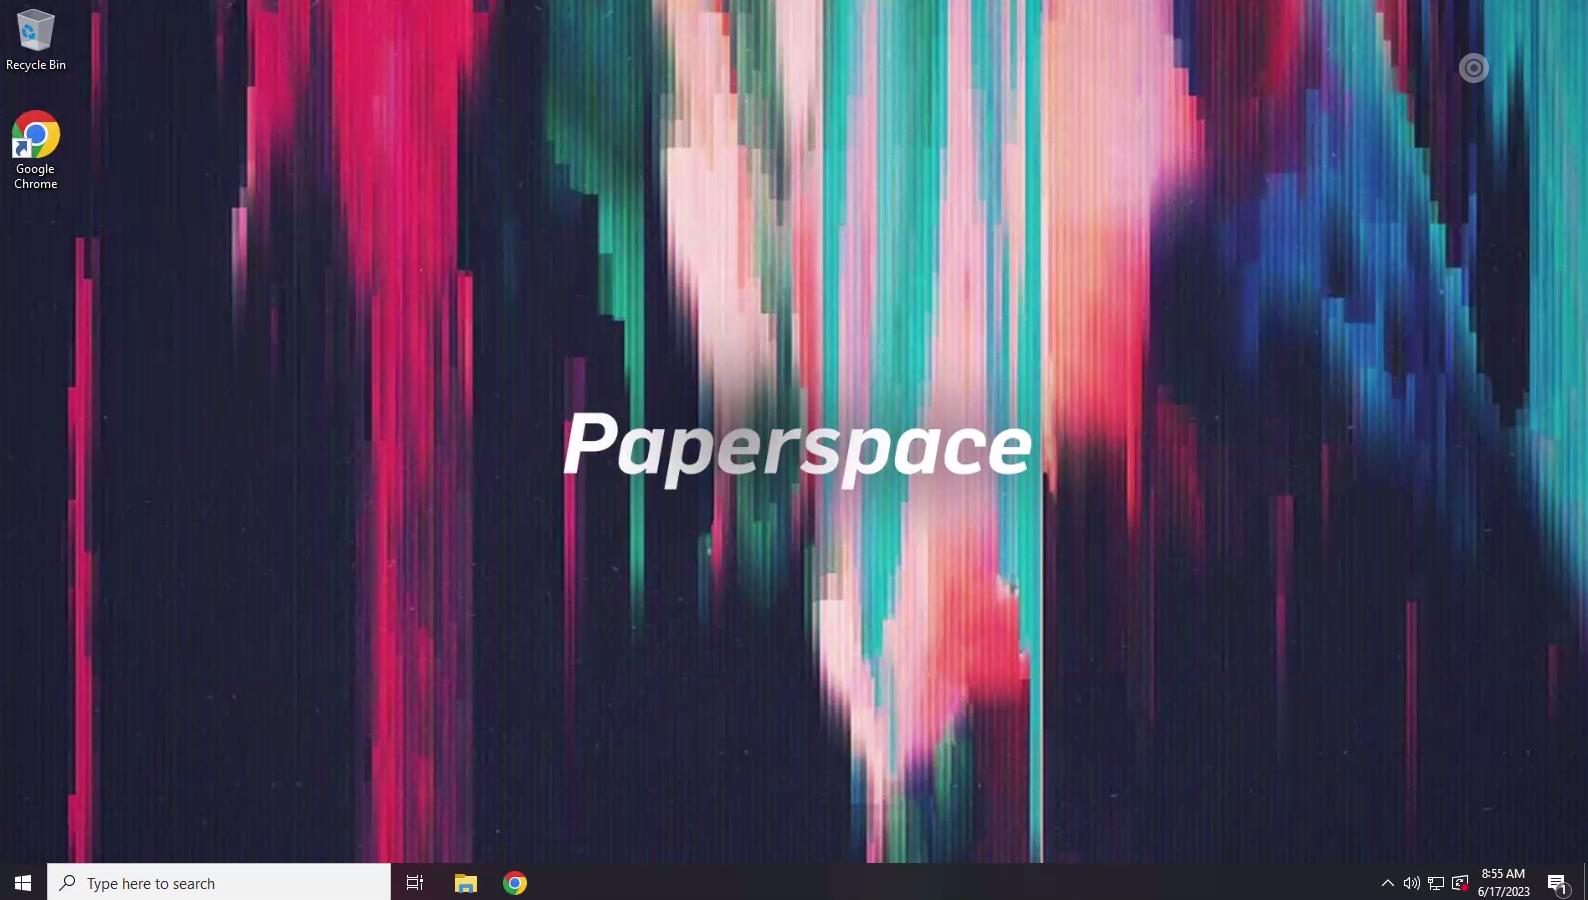 Paperspaceの日本語化を始める